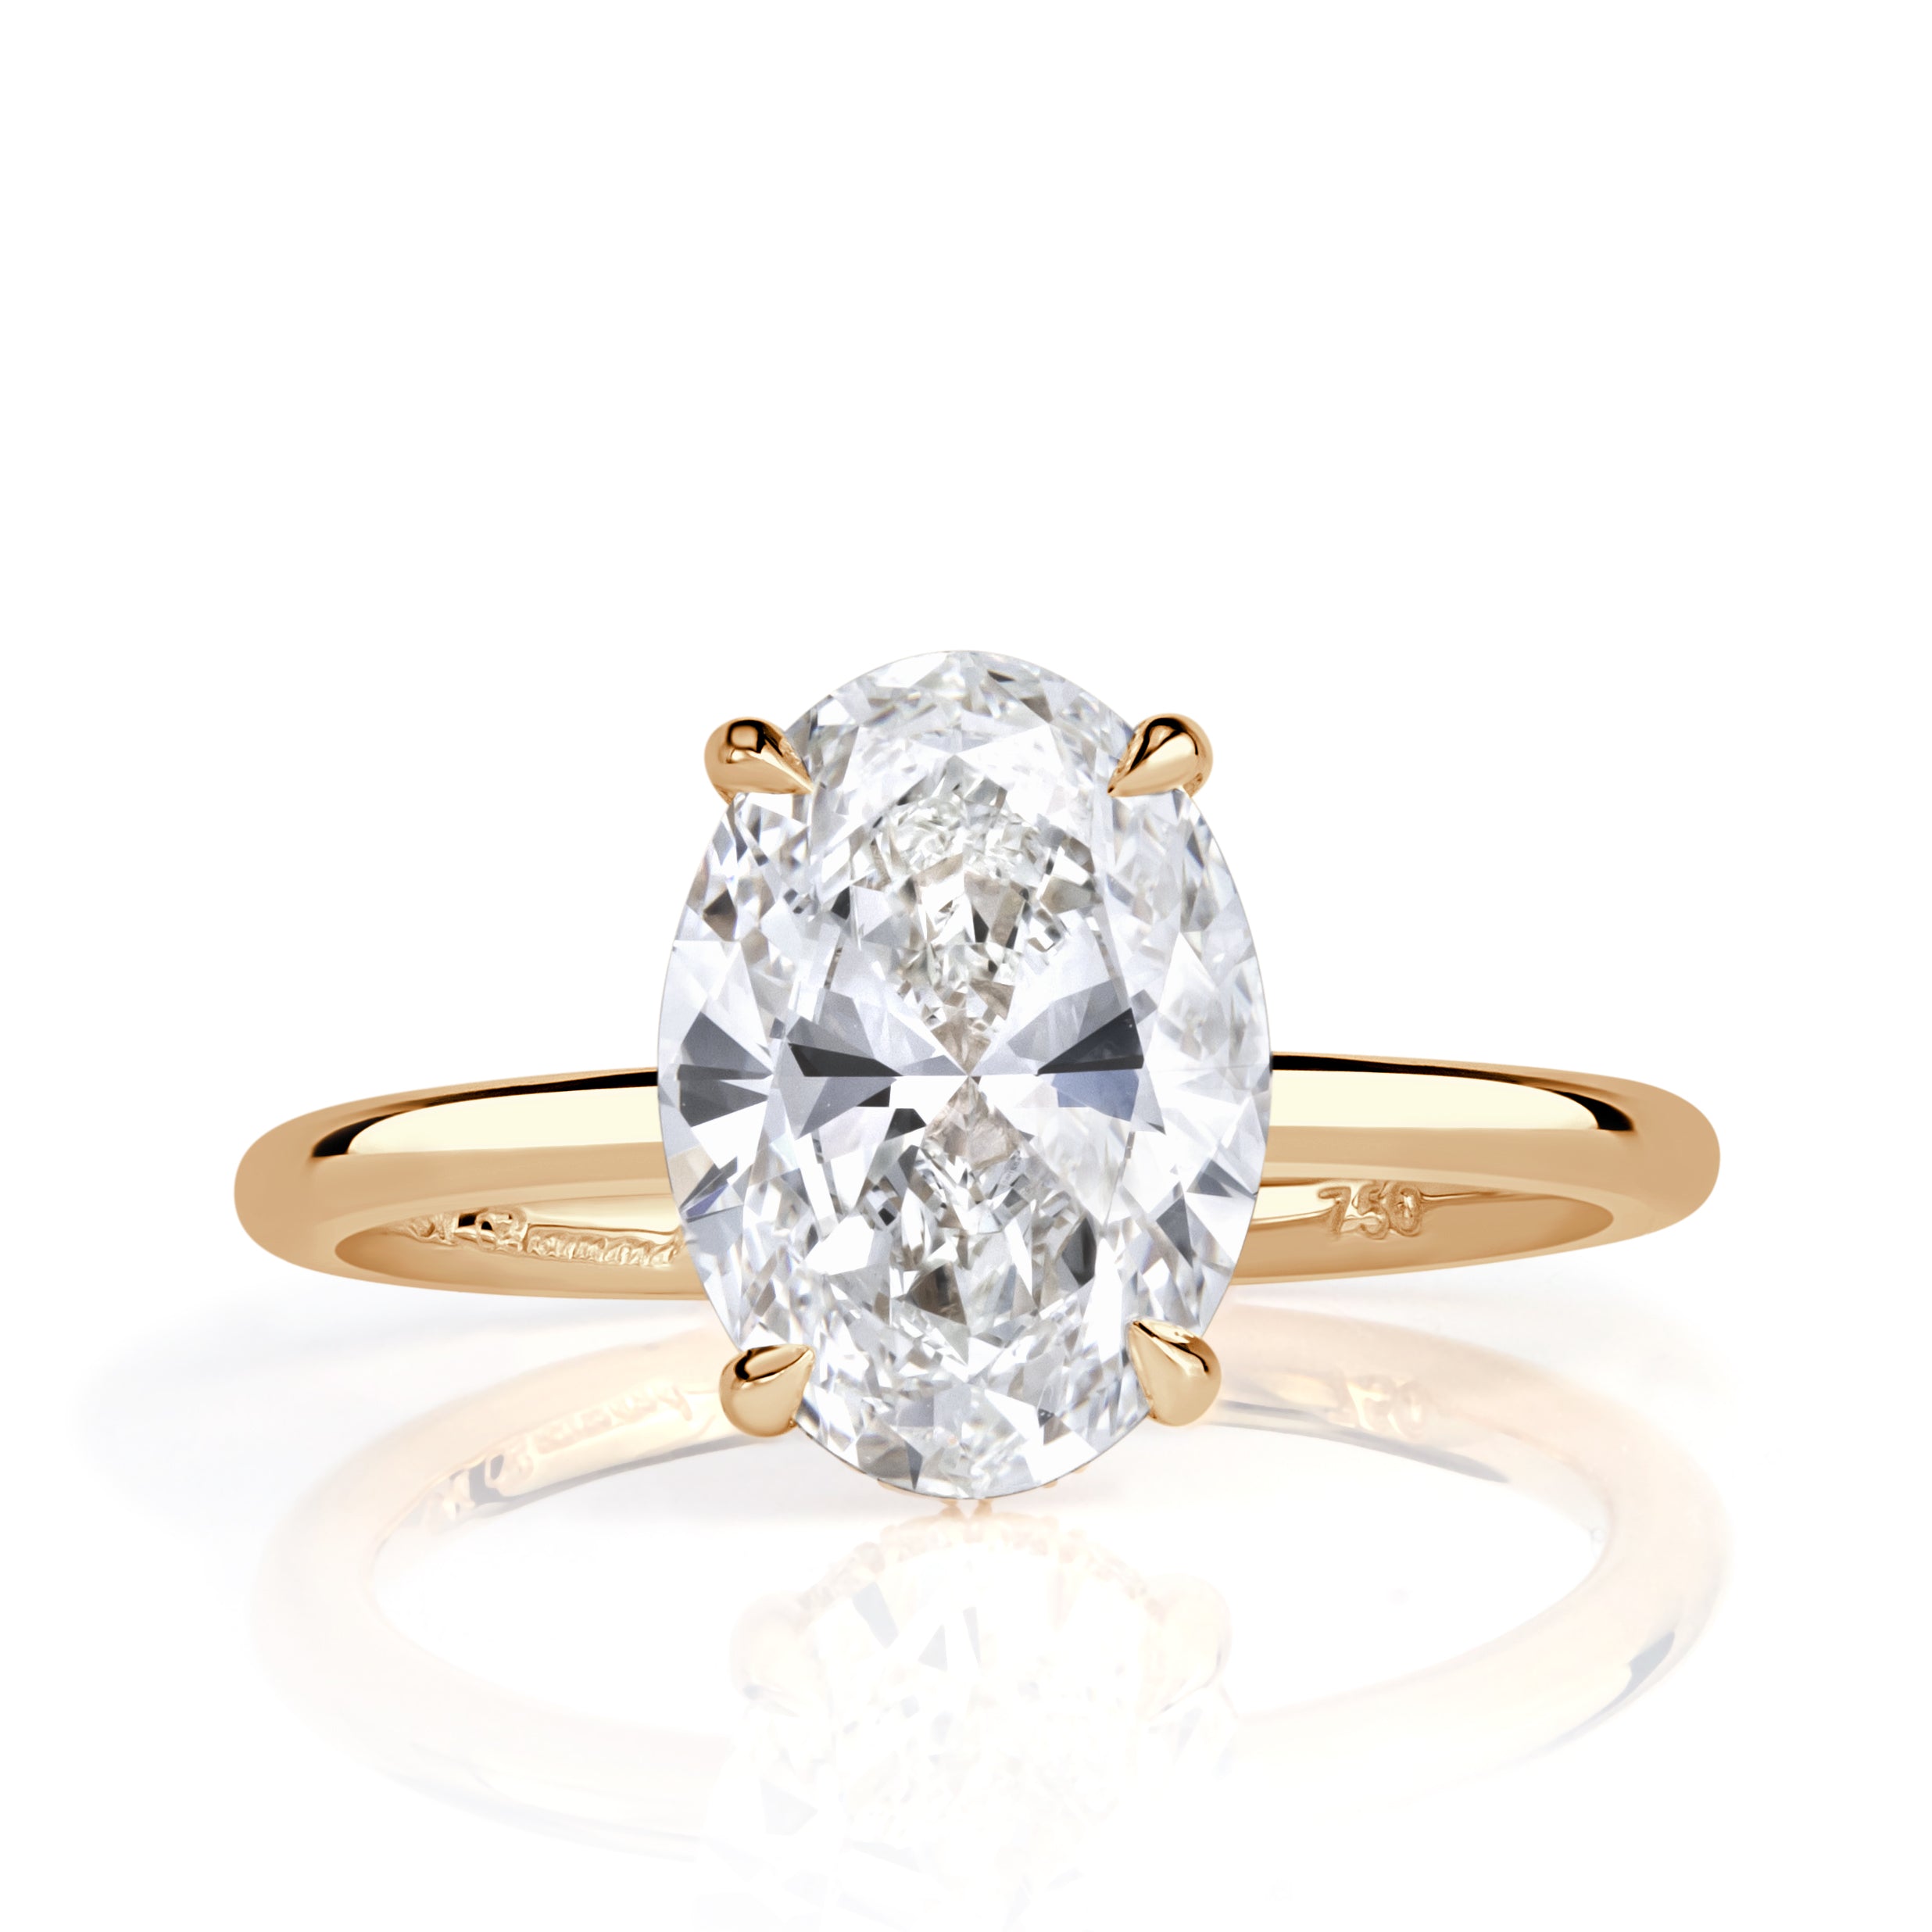 2.28ct Oval Cut Diamond Engagement Ring – Mark Broumand